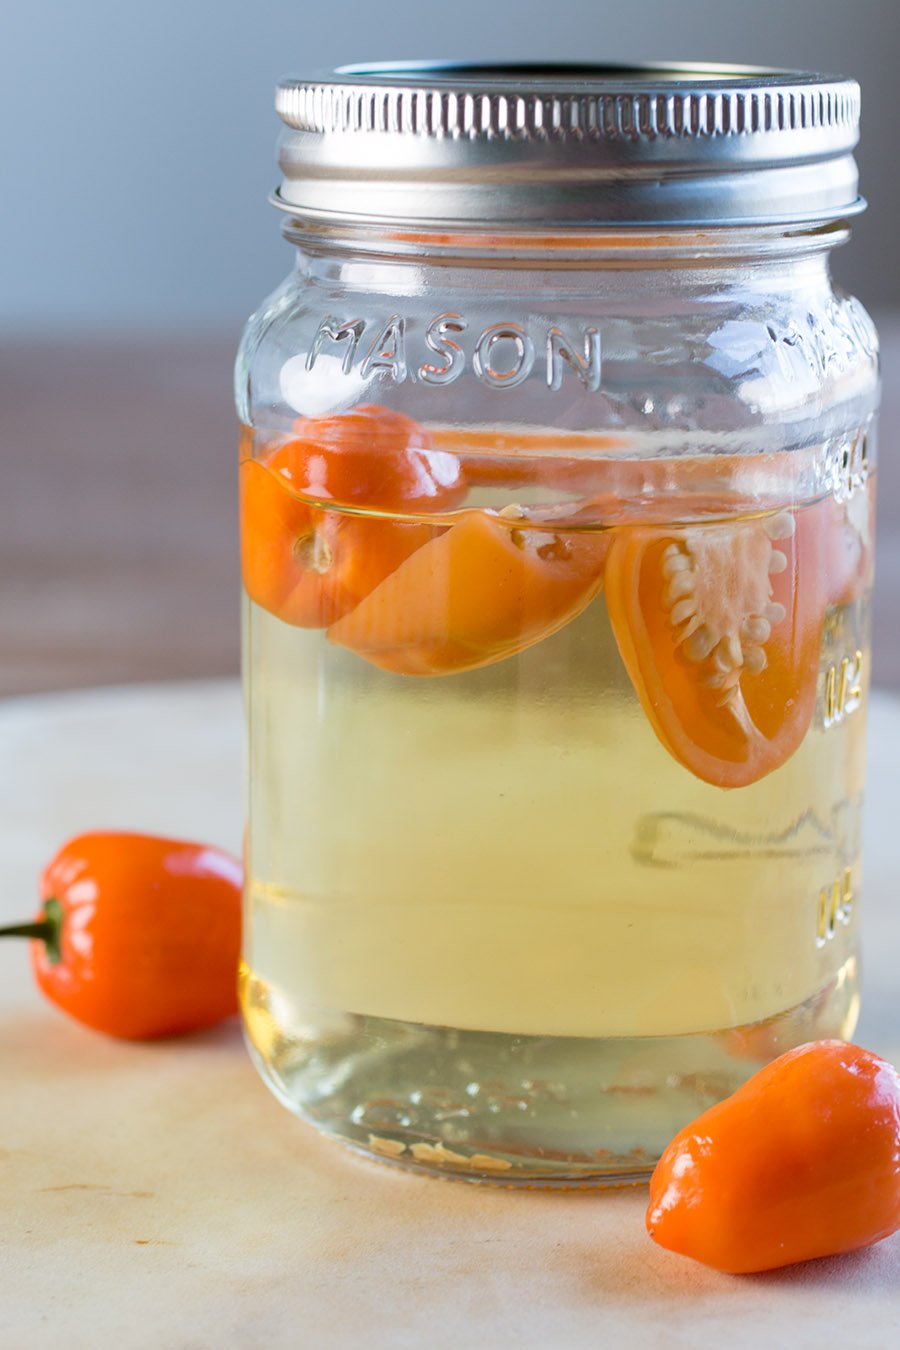 Habanero Infused Moonshine looking absolutely stunning.